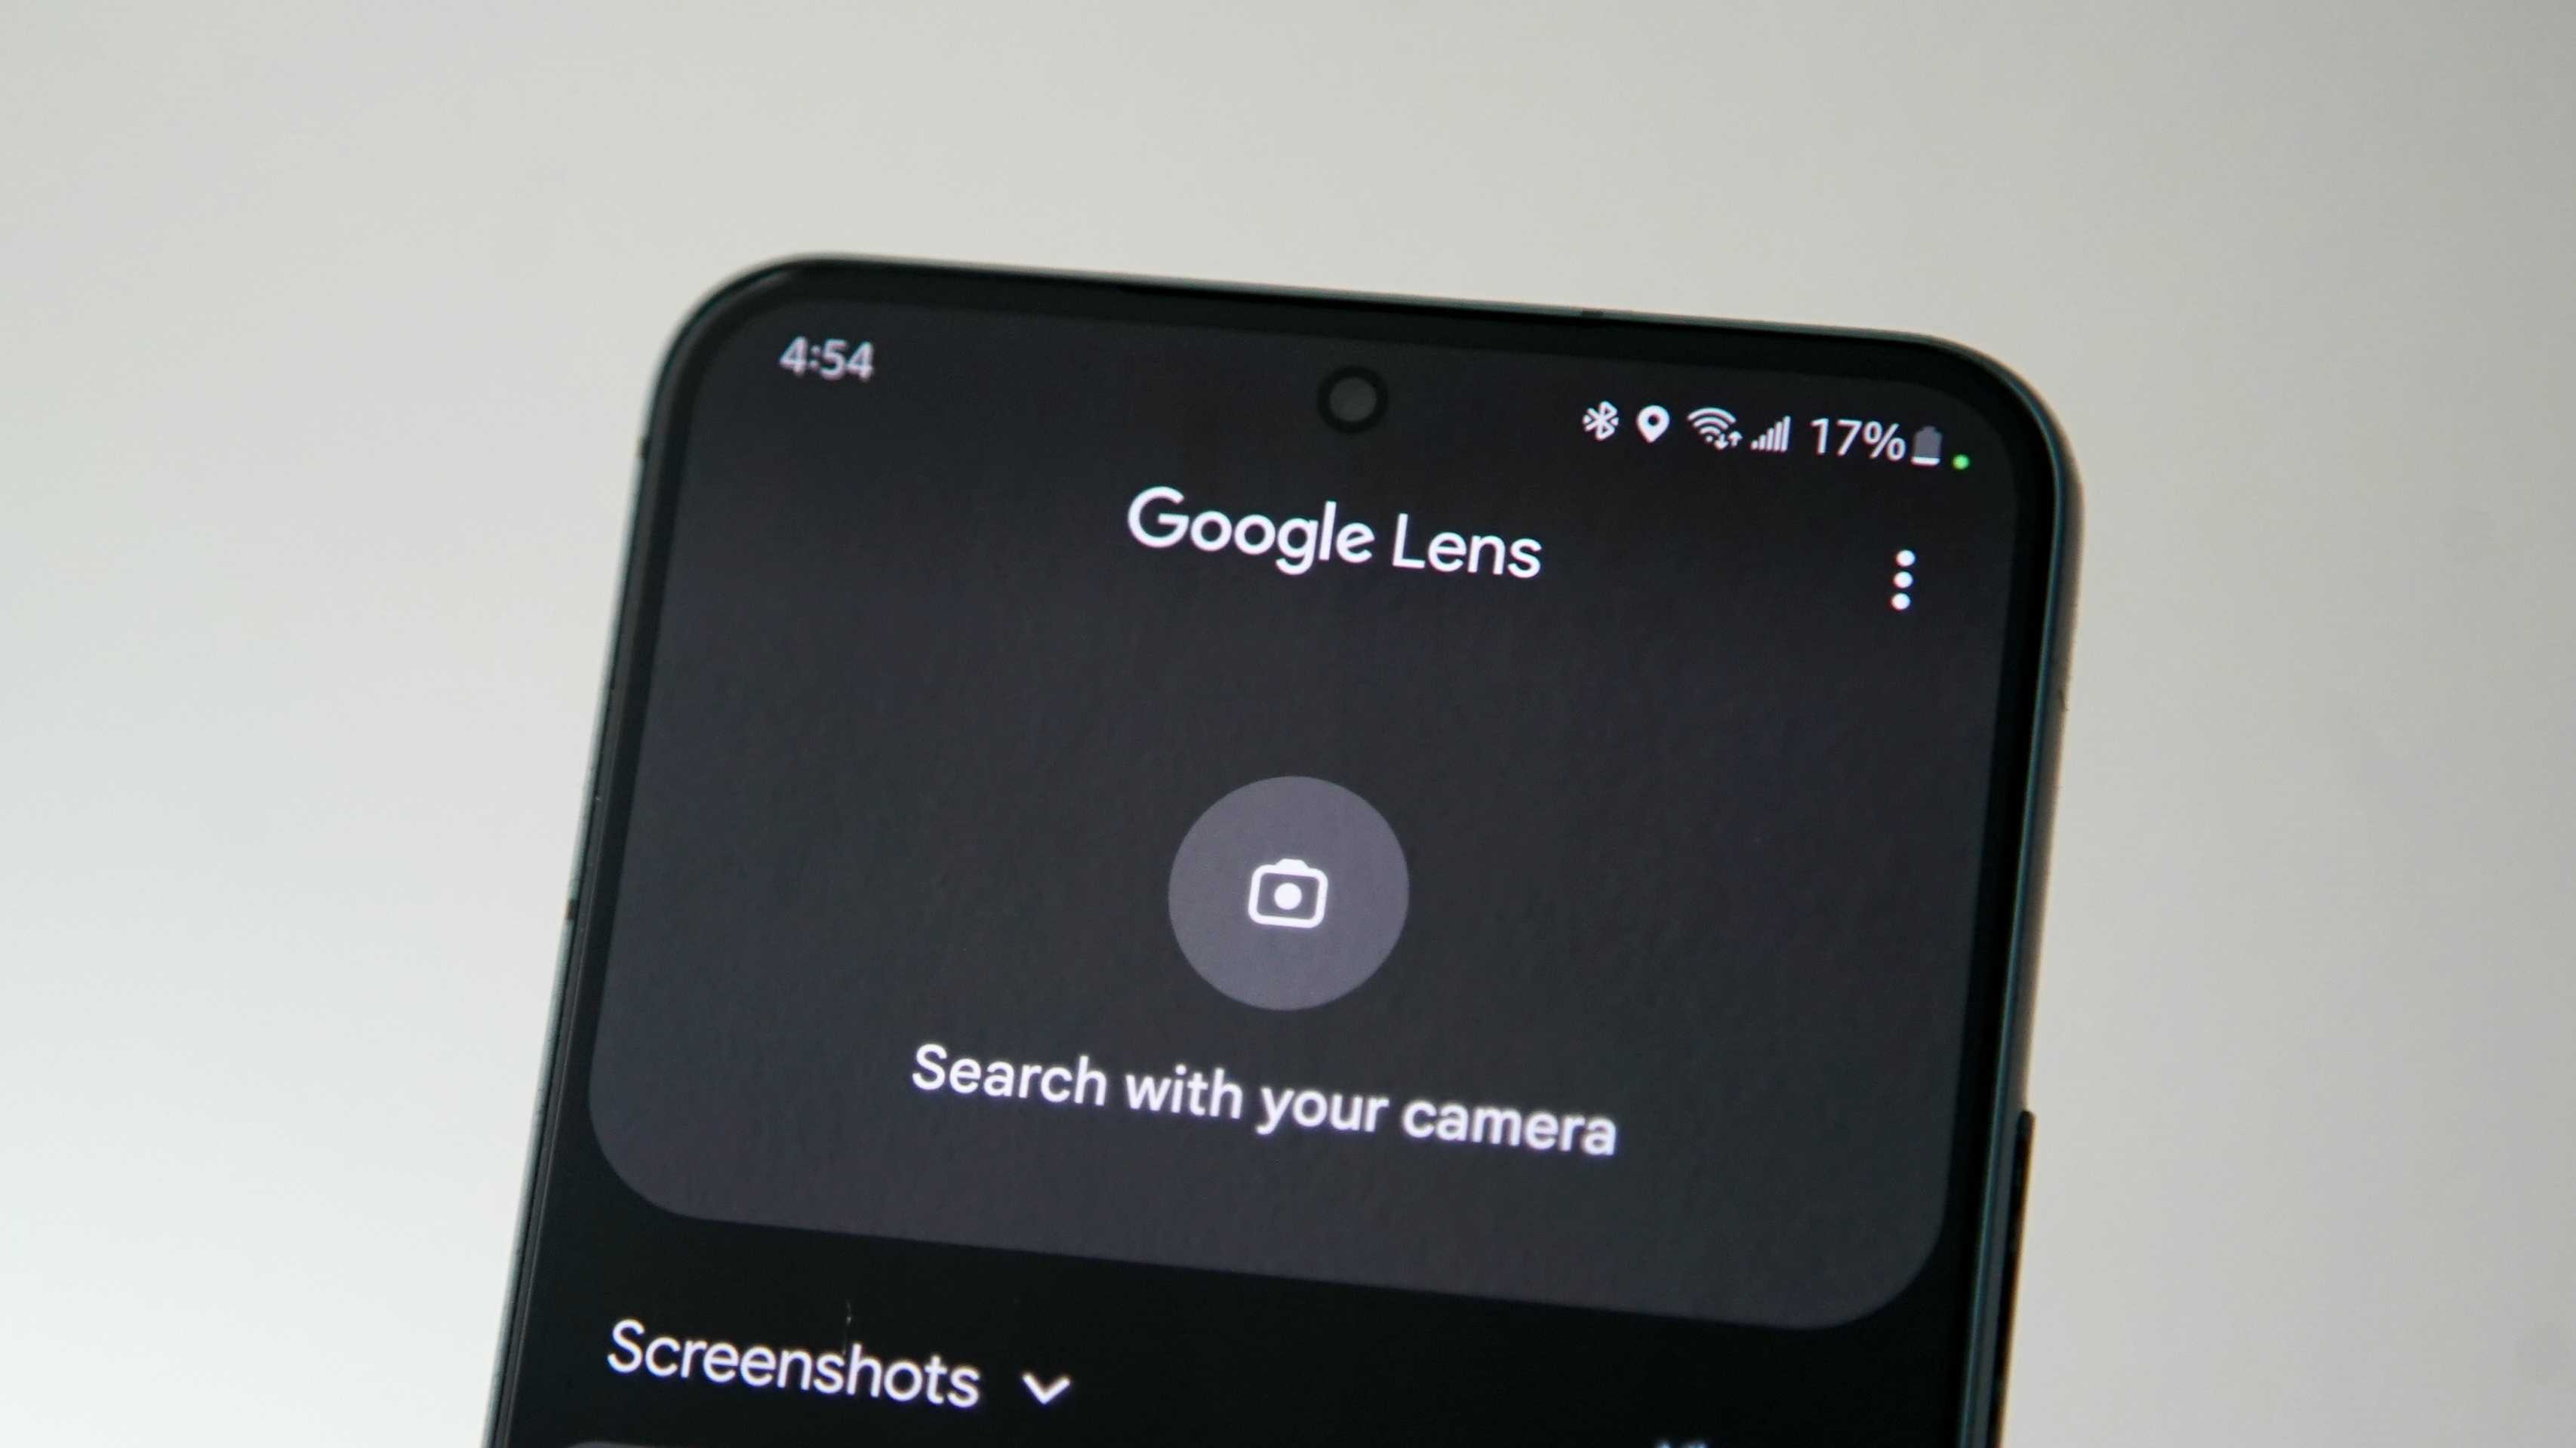 Google Translate switches to Google Lens for translating text in an image